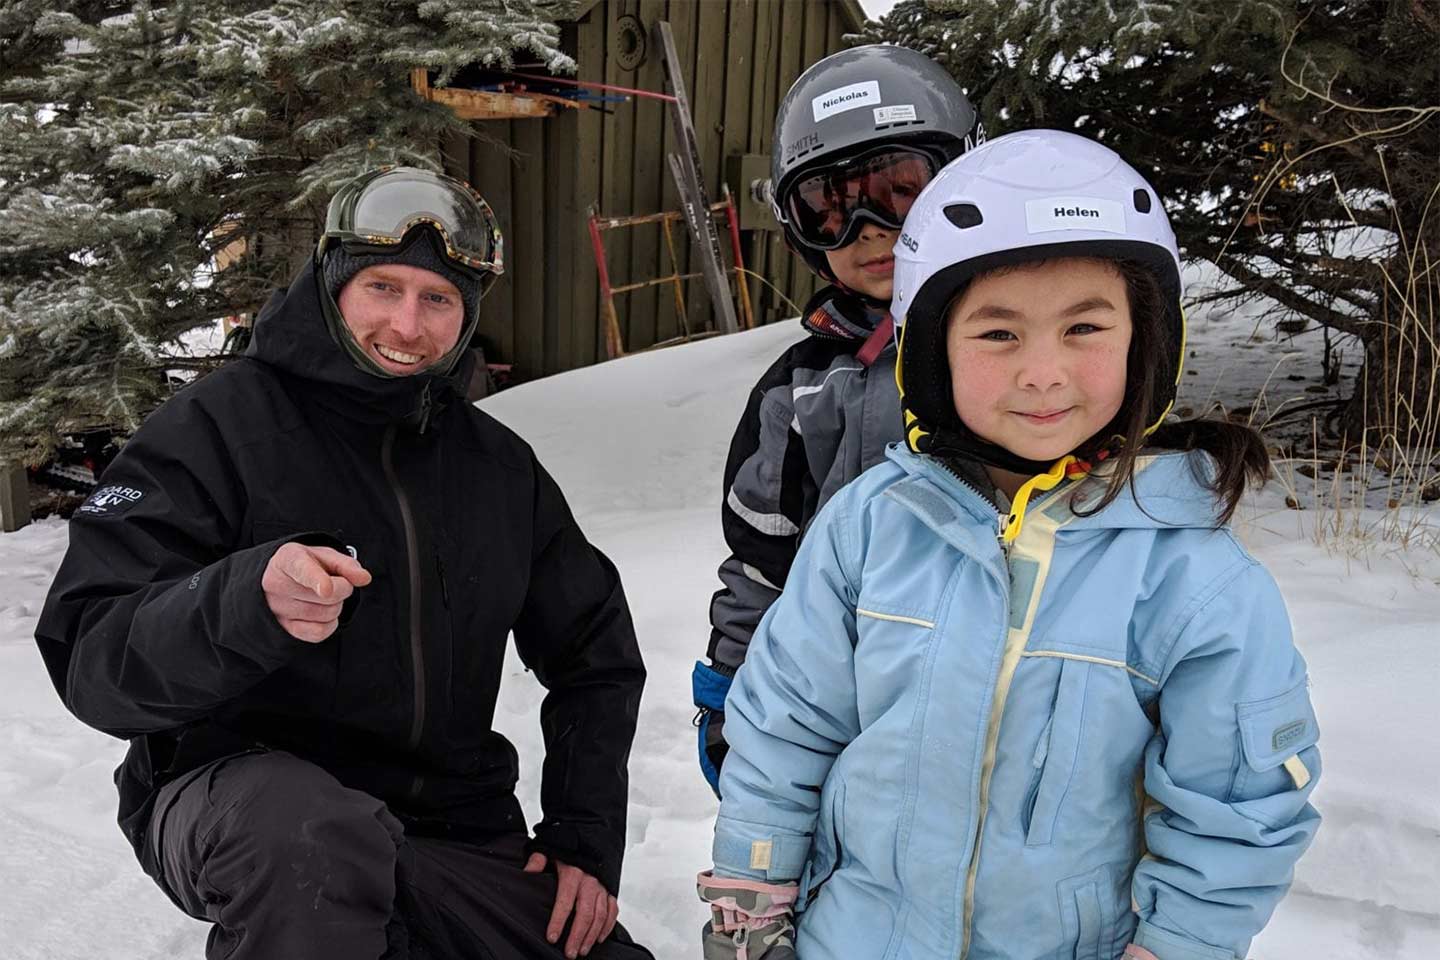 Snowboard coach with two kids